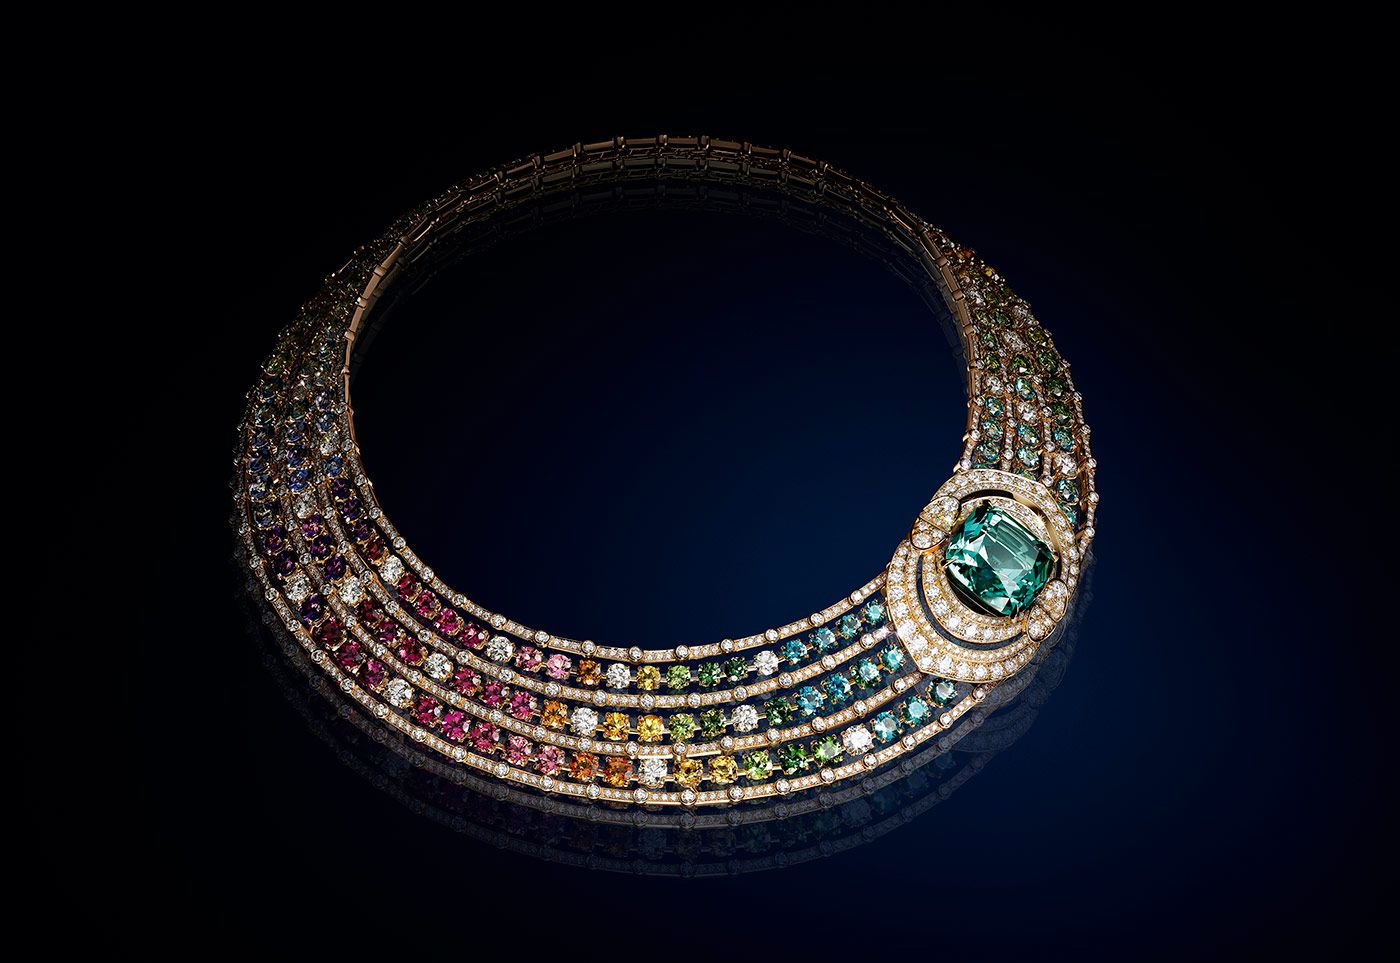 Louis Vuitton Bravery II Le Multipin High Jewellery necklace with a 42.42 carat green-blue tourmaline and an assortment of coloured stones, including tourmalines, citrines, peridots, amethysts, aquamarines, iolites, garnets and tanzanites 